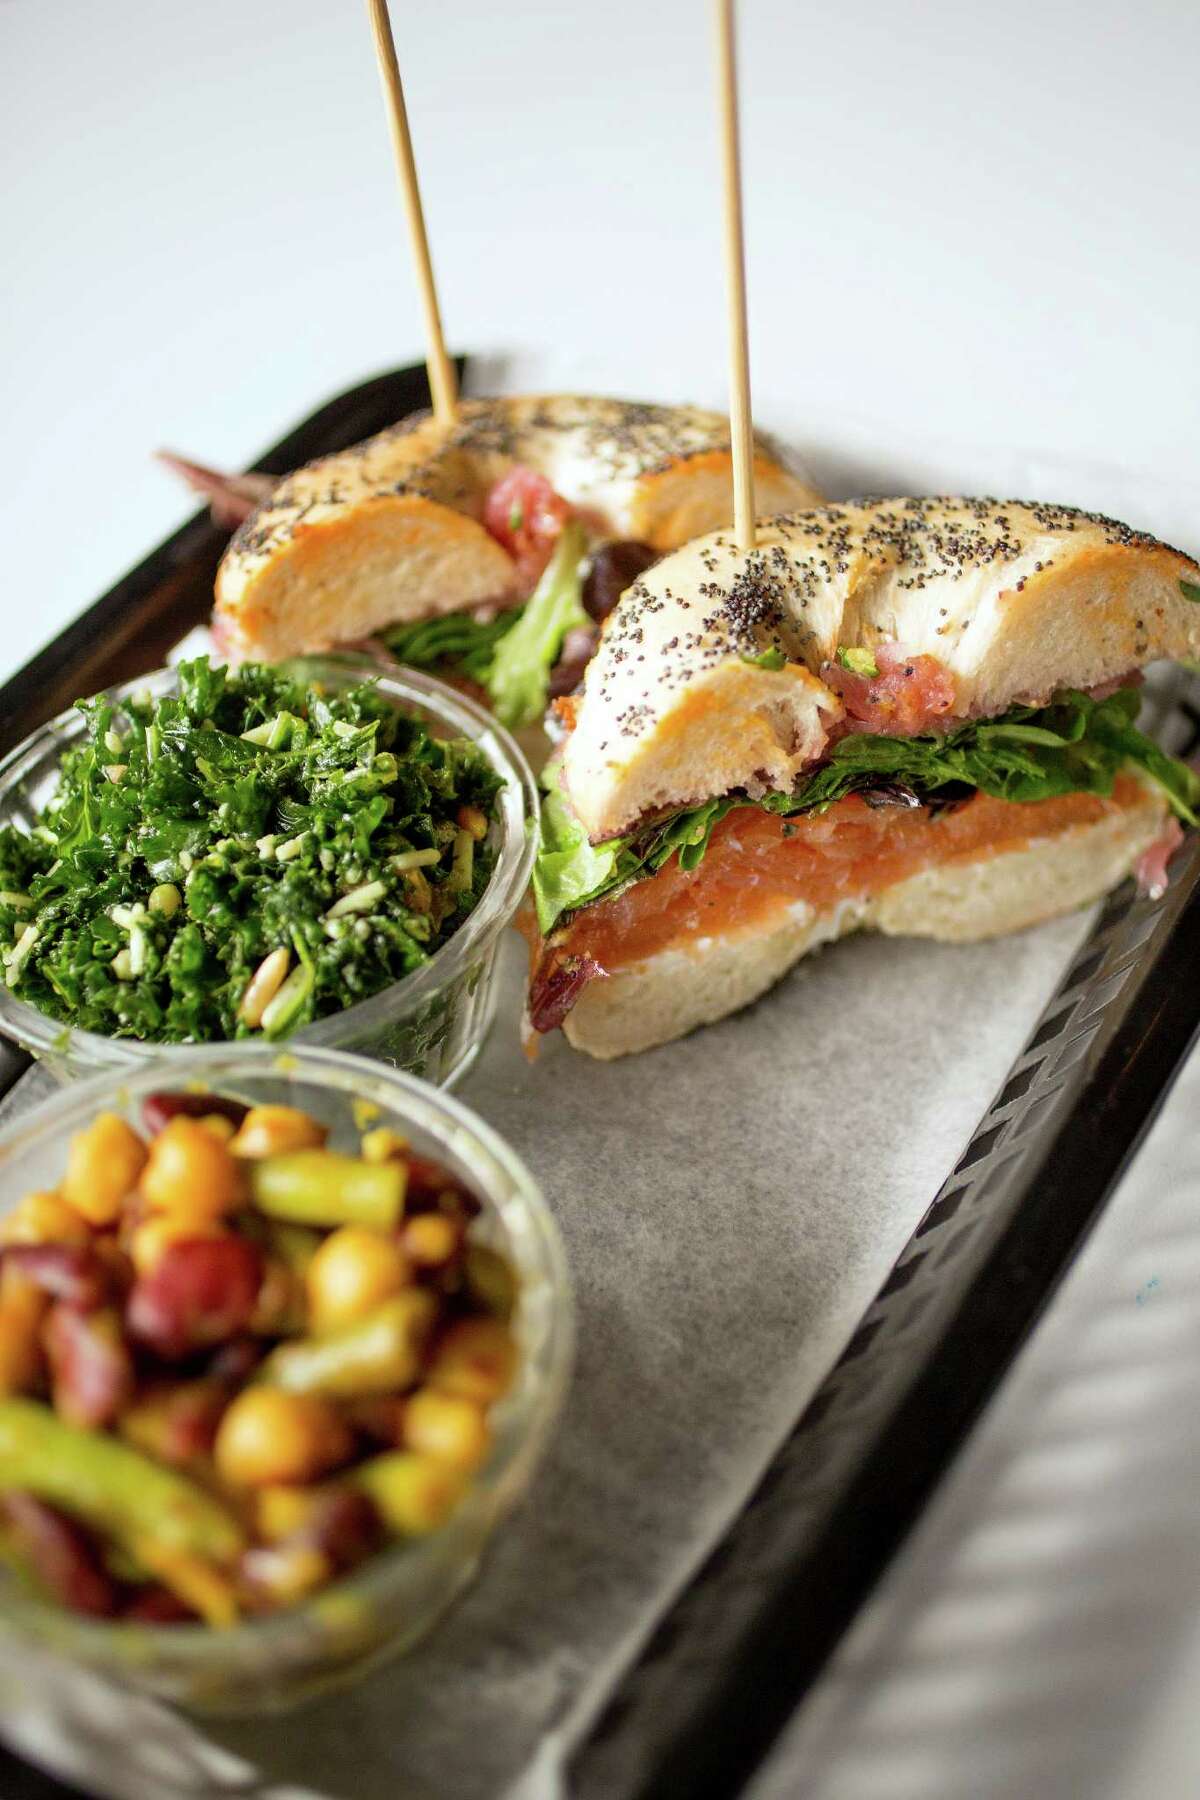 A house smoked salmon sandwich with a side of tuscan kale and four bean is seen, Friday, November 30, 2012, at Local Foods restaurant in Houston, Texas. (TODD SPOTH FOR THE CHRONICLE)